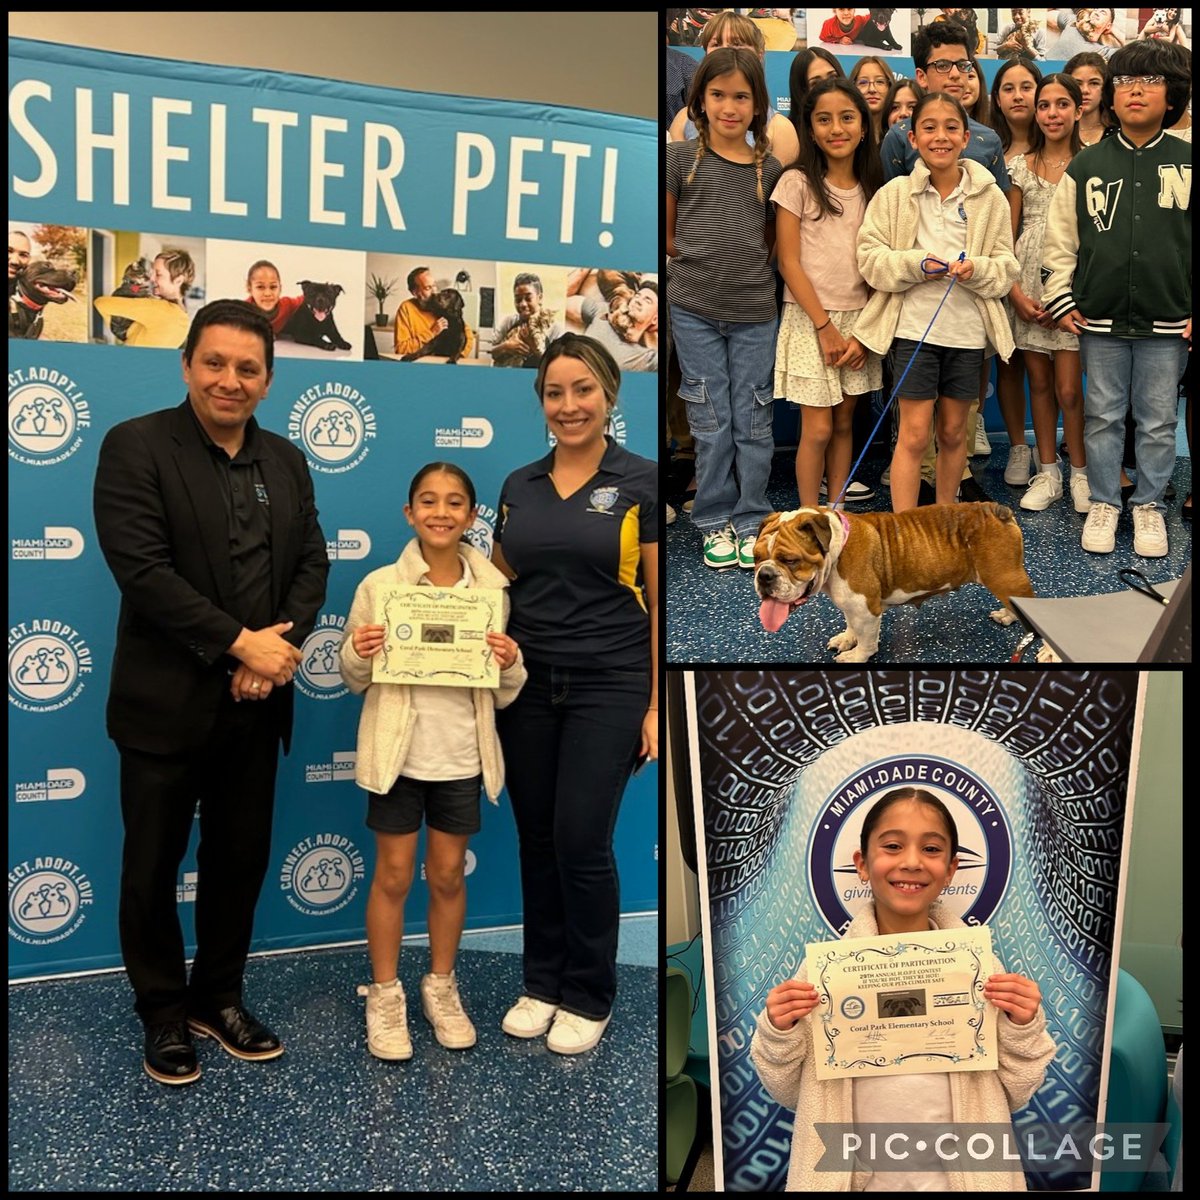 Great experience for our students who participated in the HOPE Contest @AdoptMiamiPets-so proud of them! Thank you, Ms. Barroso, STEAM Liaison & 3rd grader Mila Sirota, for representing our school-great work! @suptdotres @MDCPS @MjLewis13 @MDCPSCentral @MSGarciaMDCPS @MDCPSSTEAM